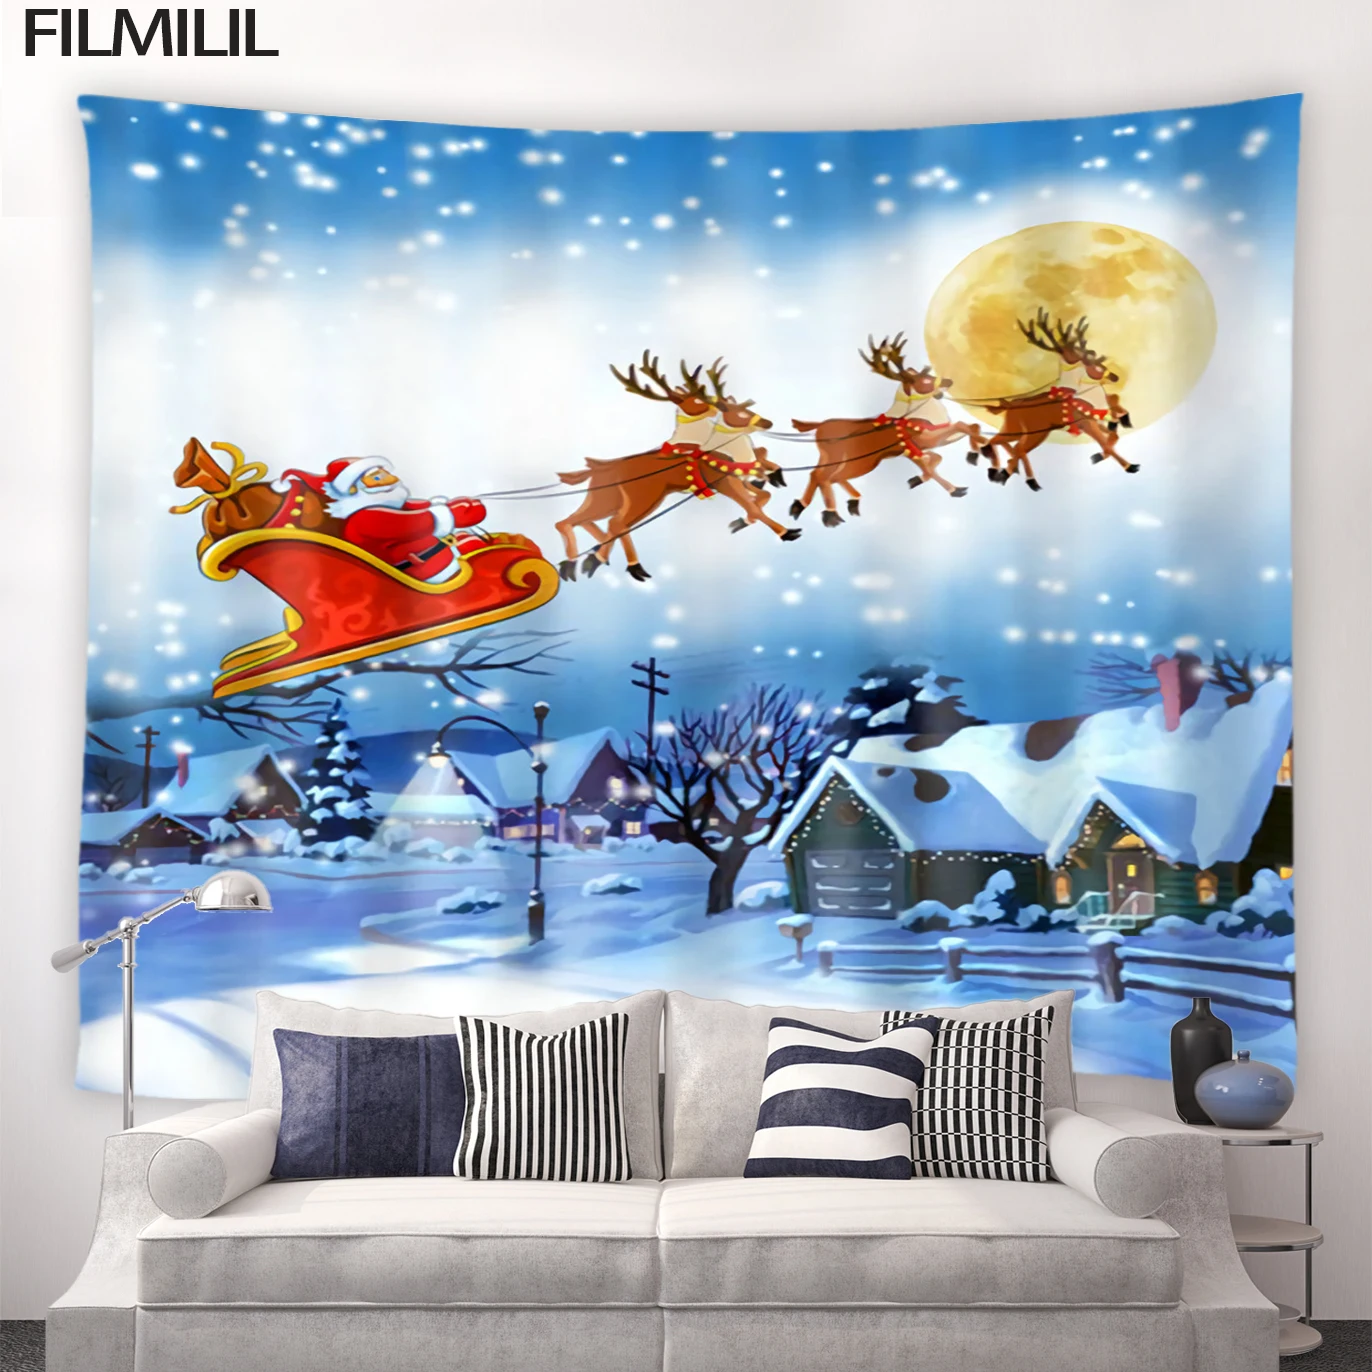 

Cartoon Christmas Tapestry Elk Sleigh Santa Claus Snow Scenery New Year Party Decor Home Wall Hanging Xmas Theme Mural Blanket